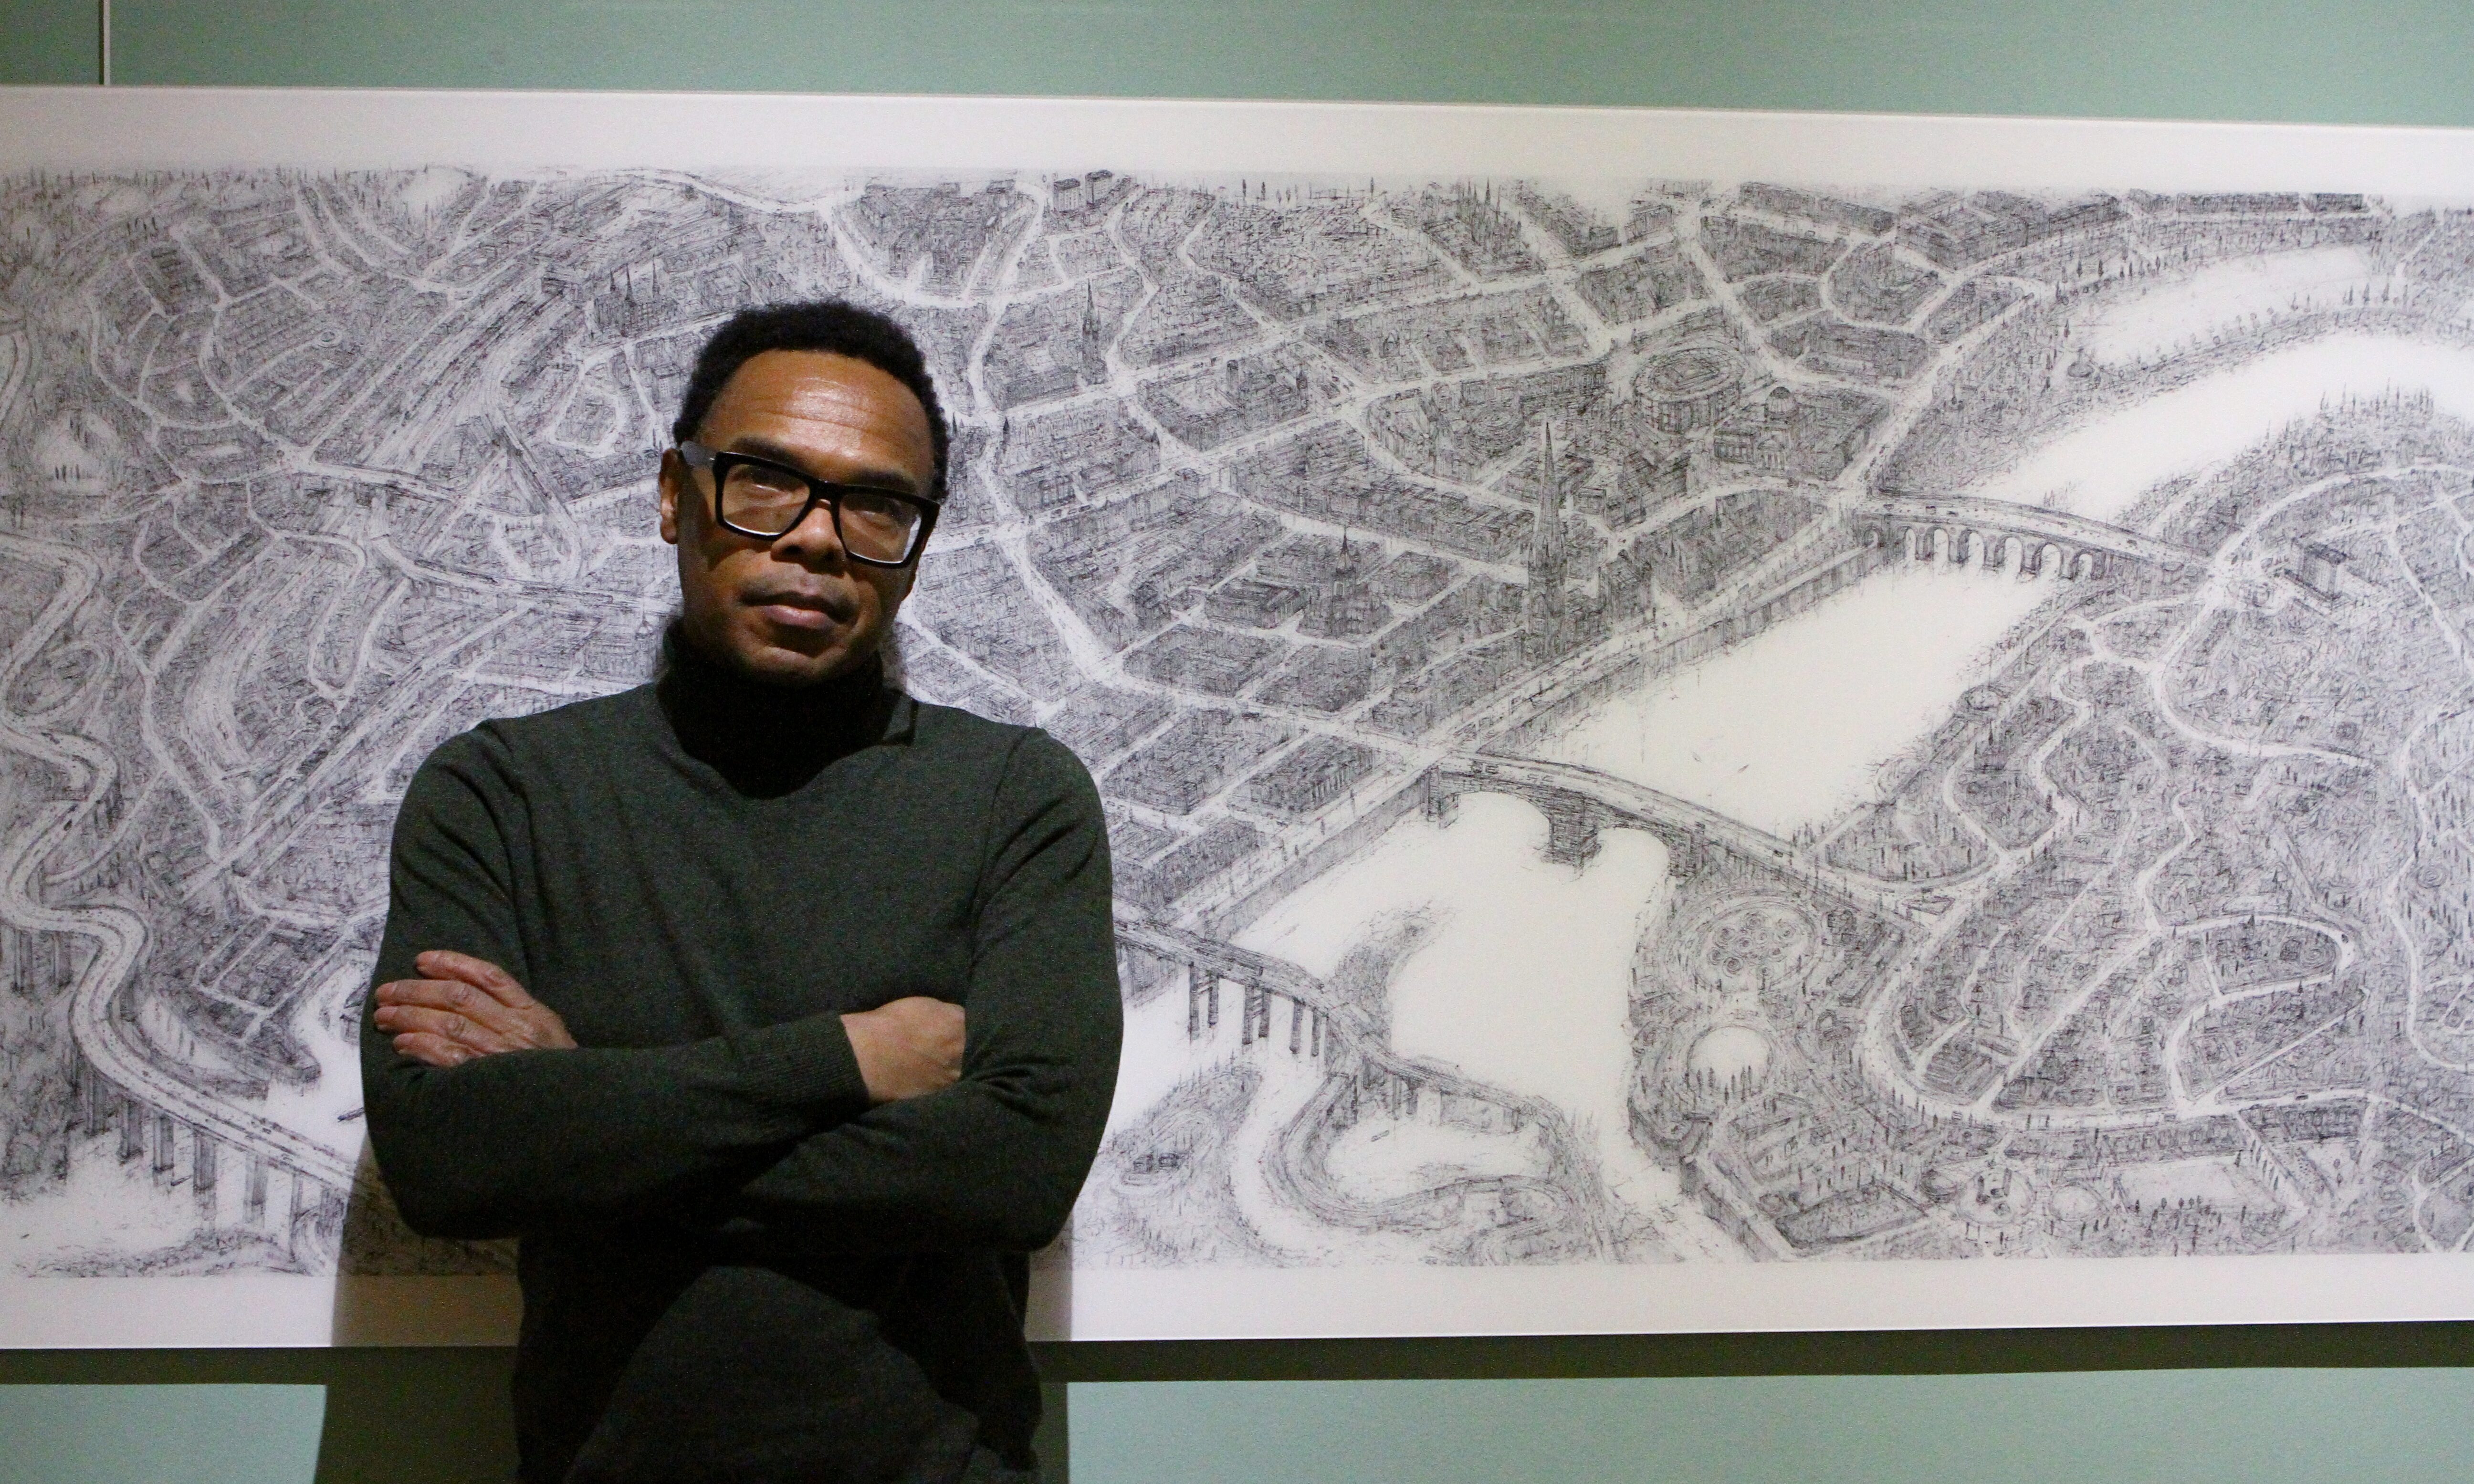 Artist Carl Lavia with a poster version of his drawing of the City of Perth.